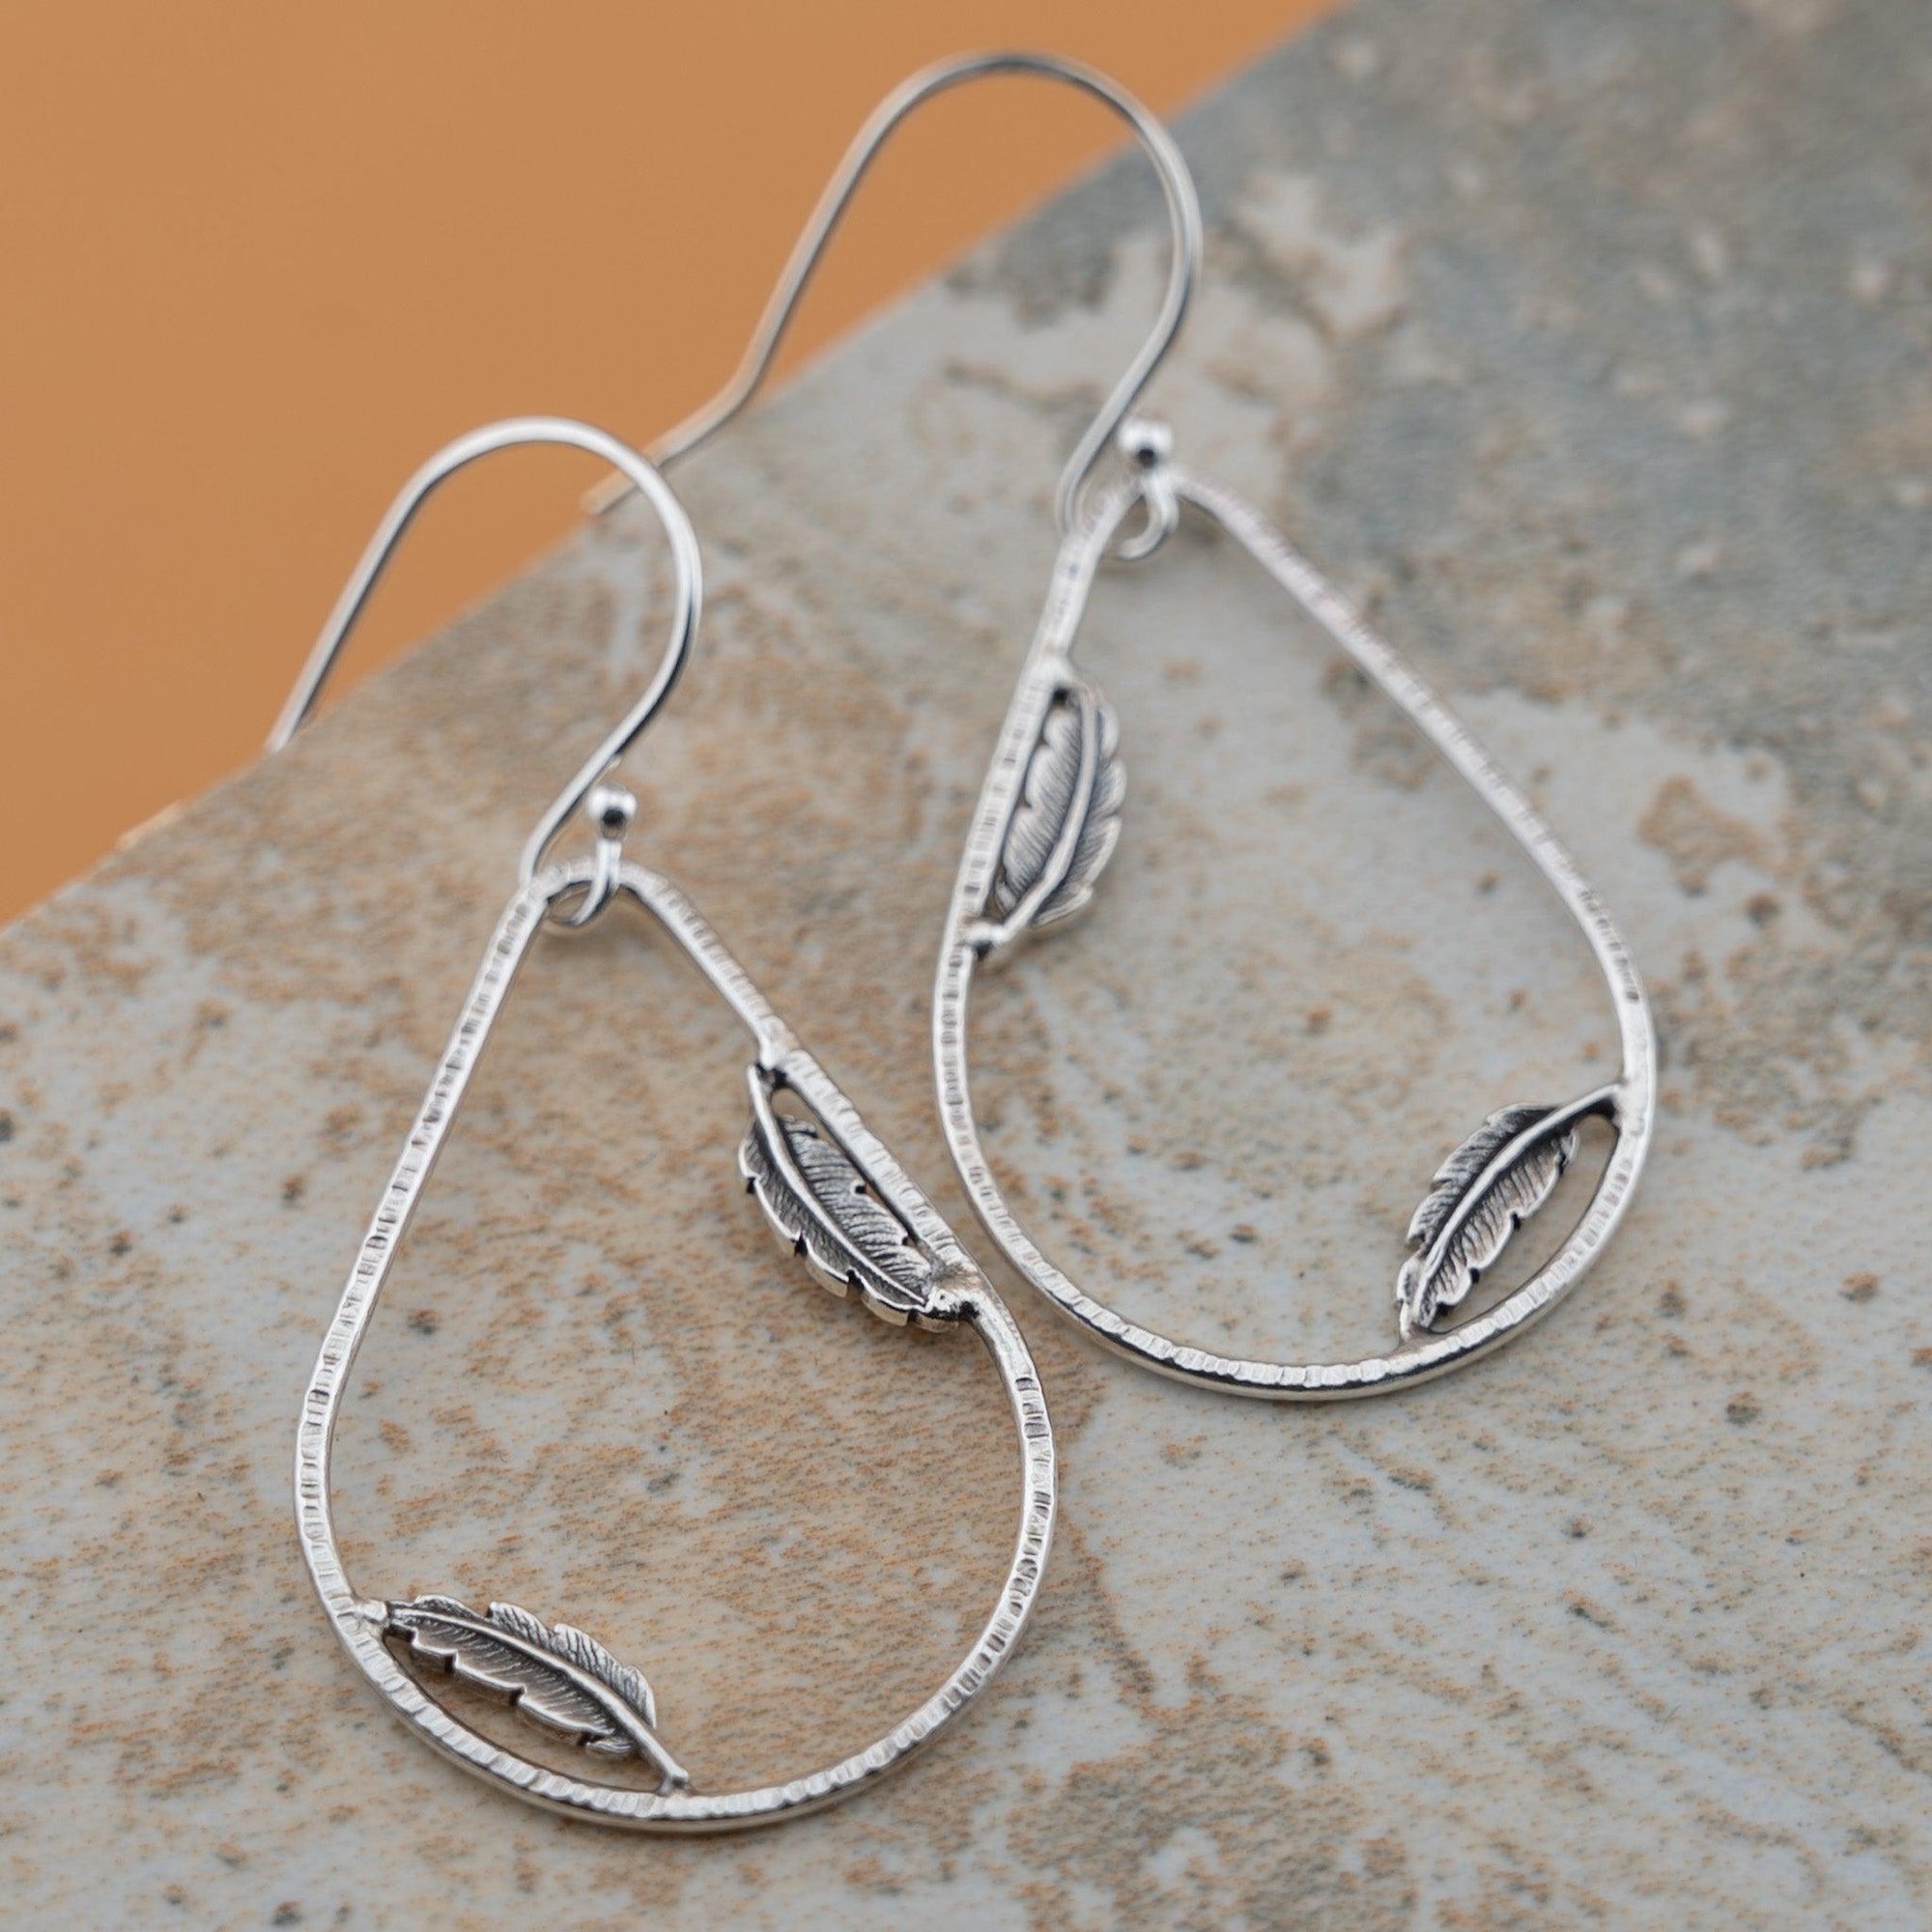 Sterling silver teardrop hoop earrings with dainty feather accents